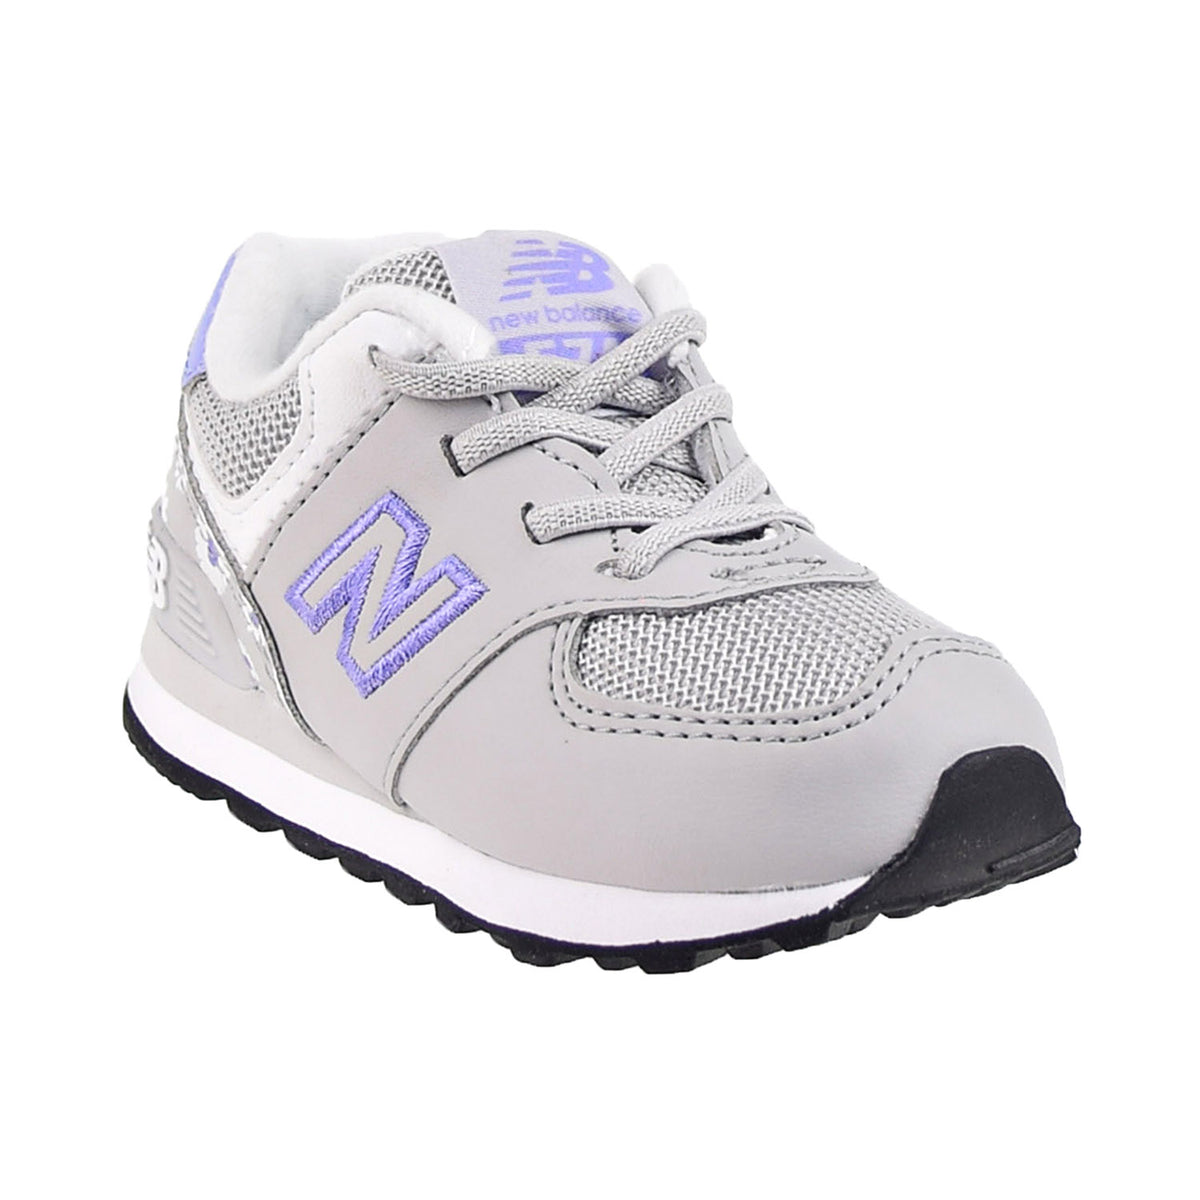 New 574 Bungee Toddler's Shoes White-Grey-Purple